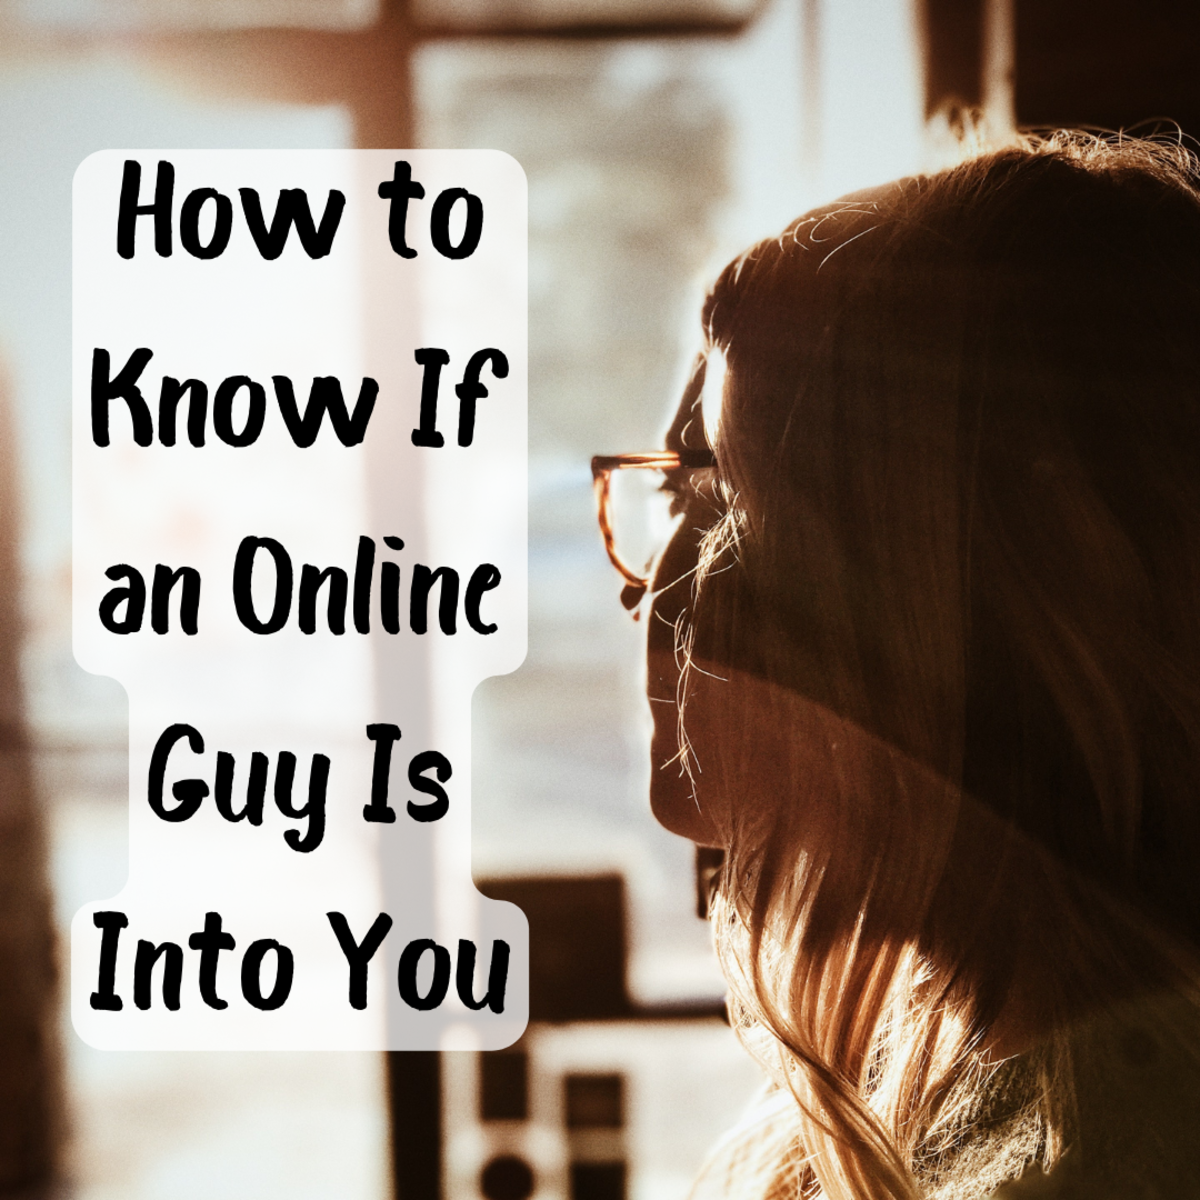 Is he into me? Read on to find out whether the guy you met online is truly interested in you.